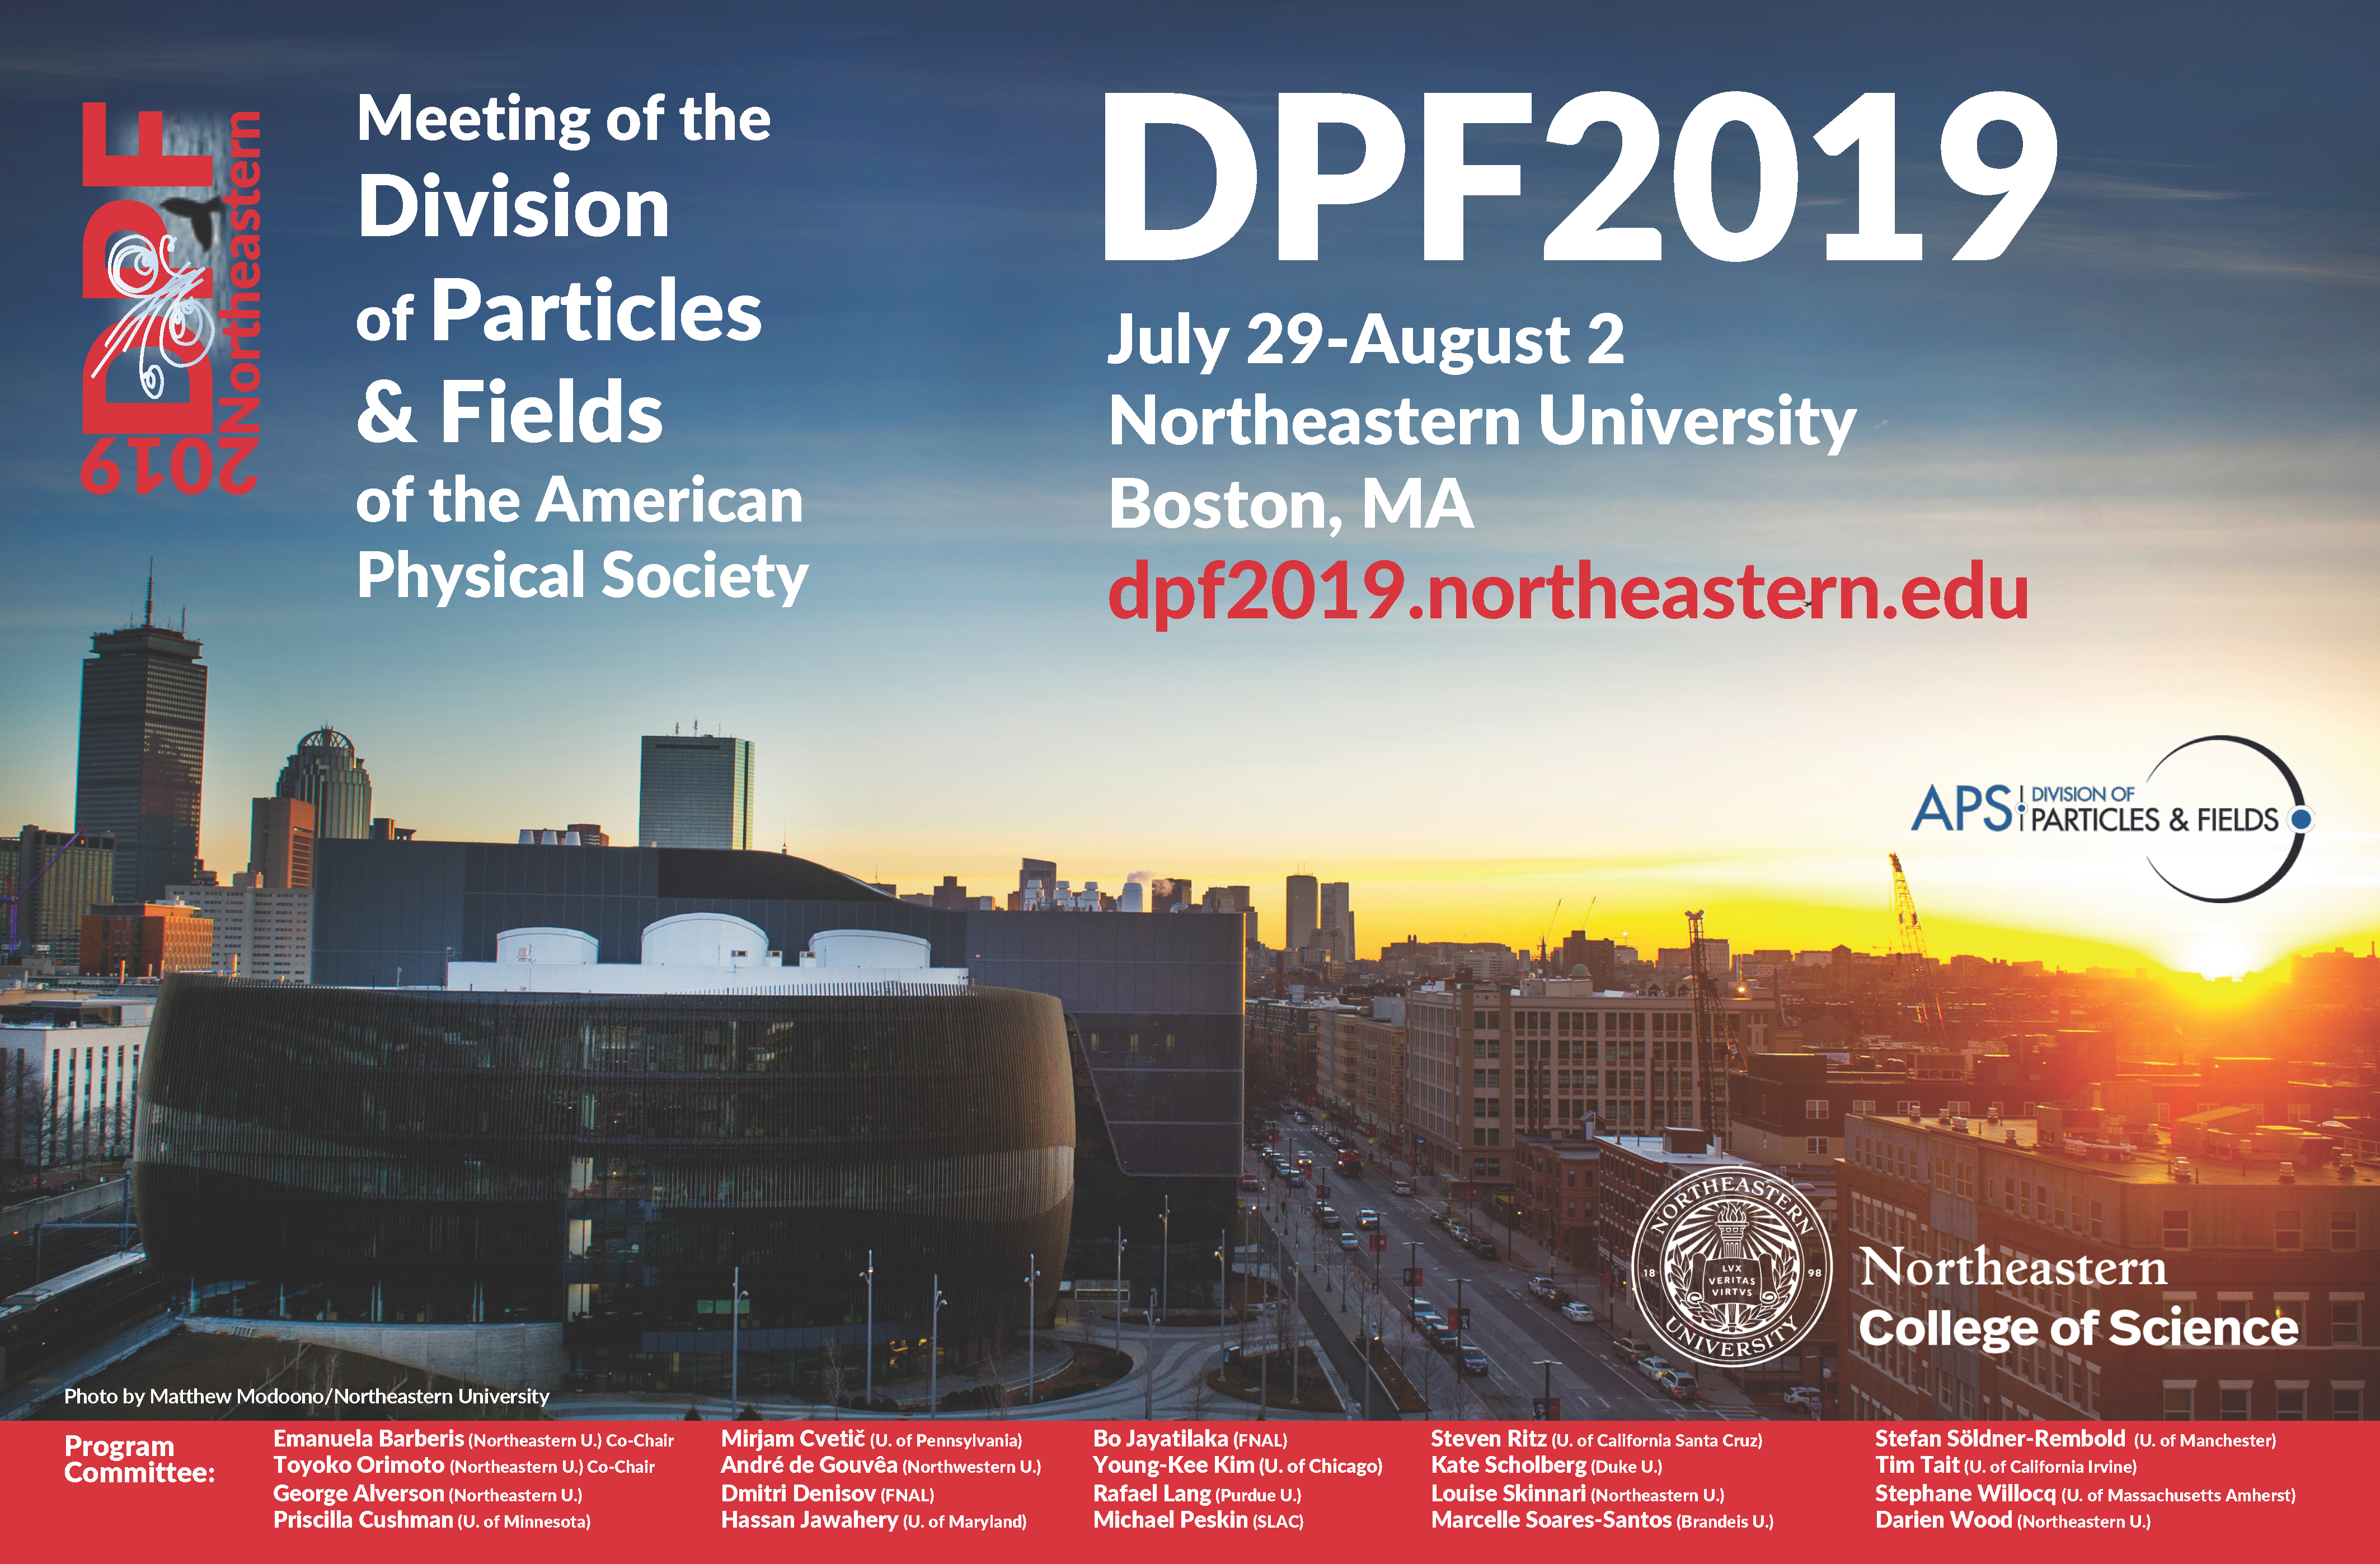 2019 Meeting of the Division of Particles & Fields of the American